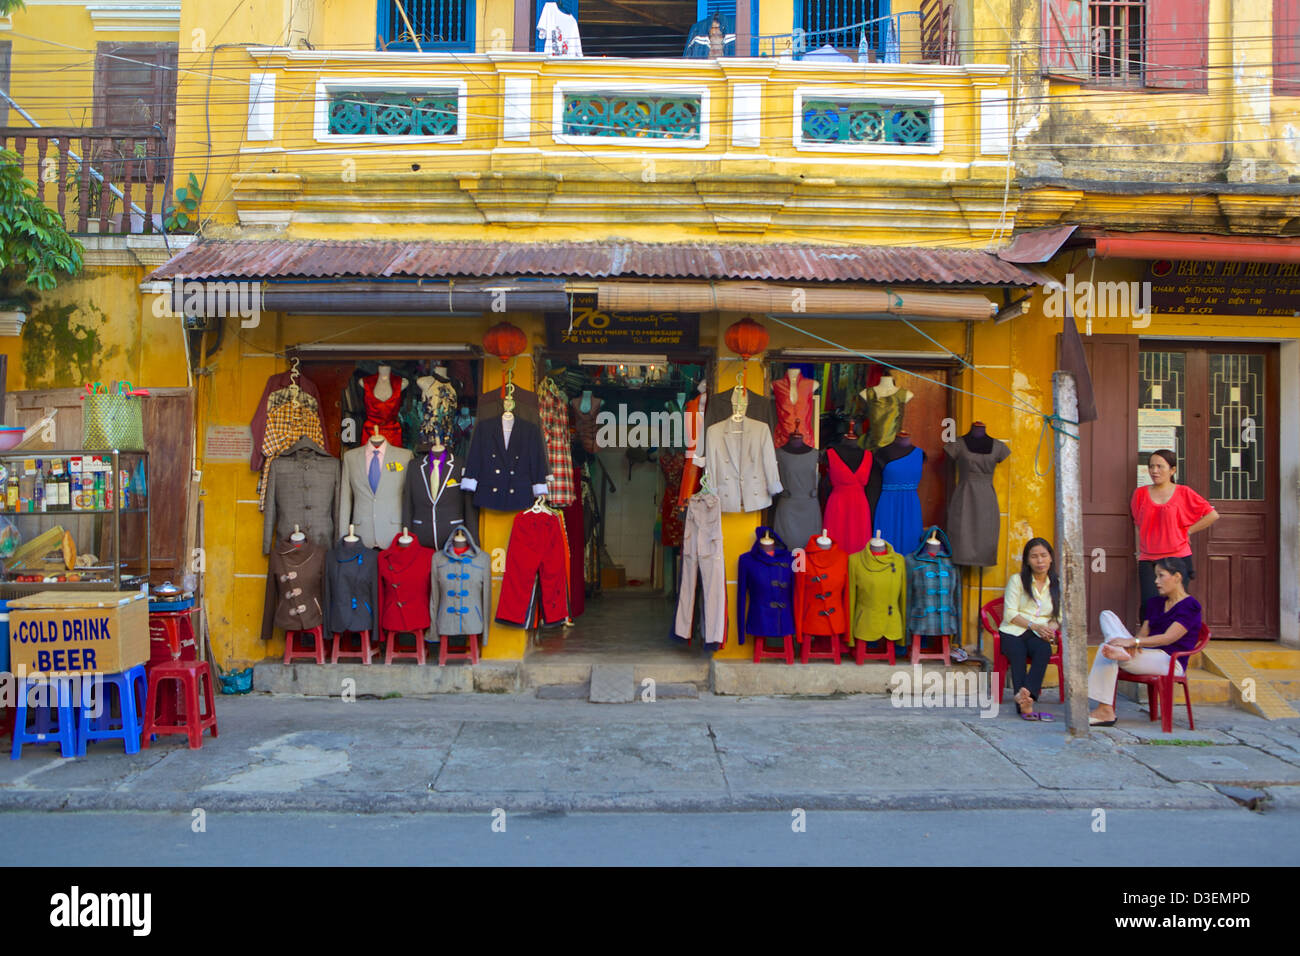 People sitting clothing Shop at Hoi An, Vietnam Stock Photo